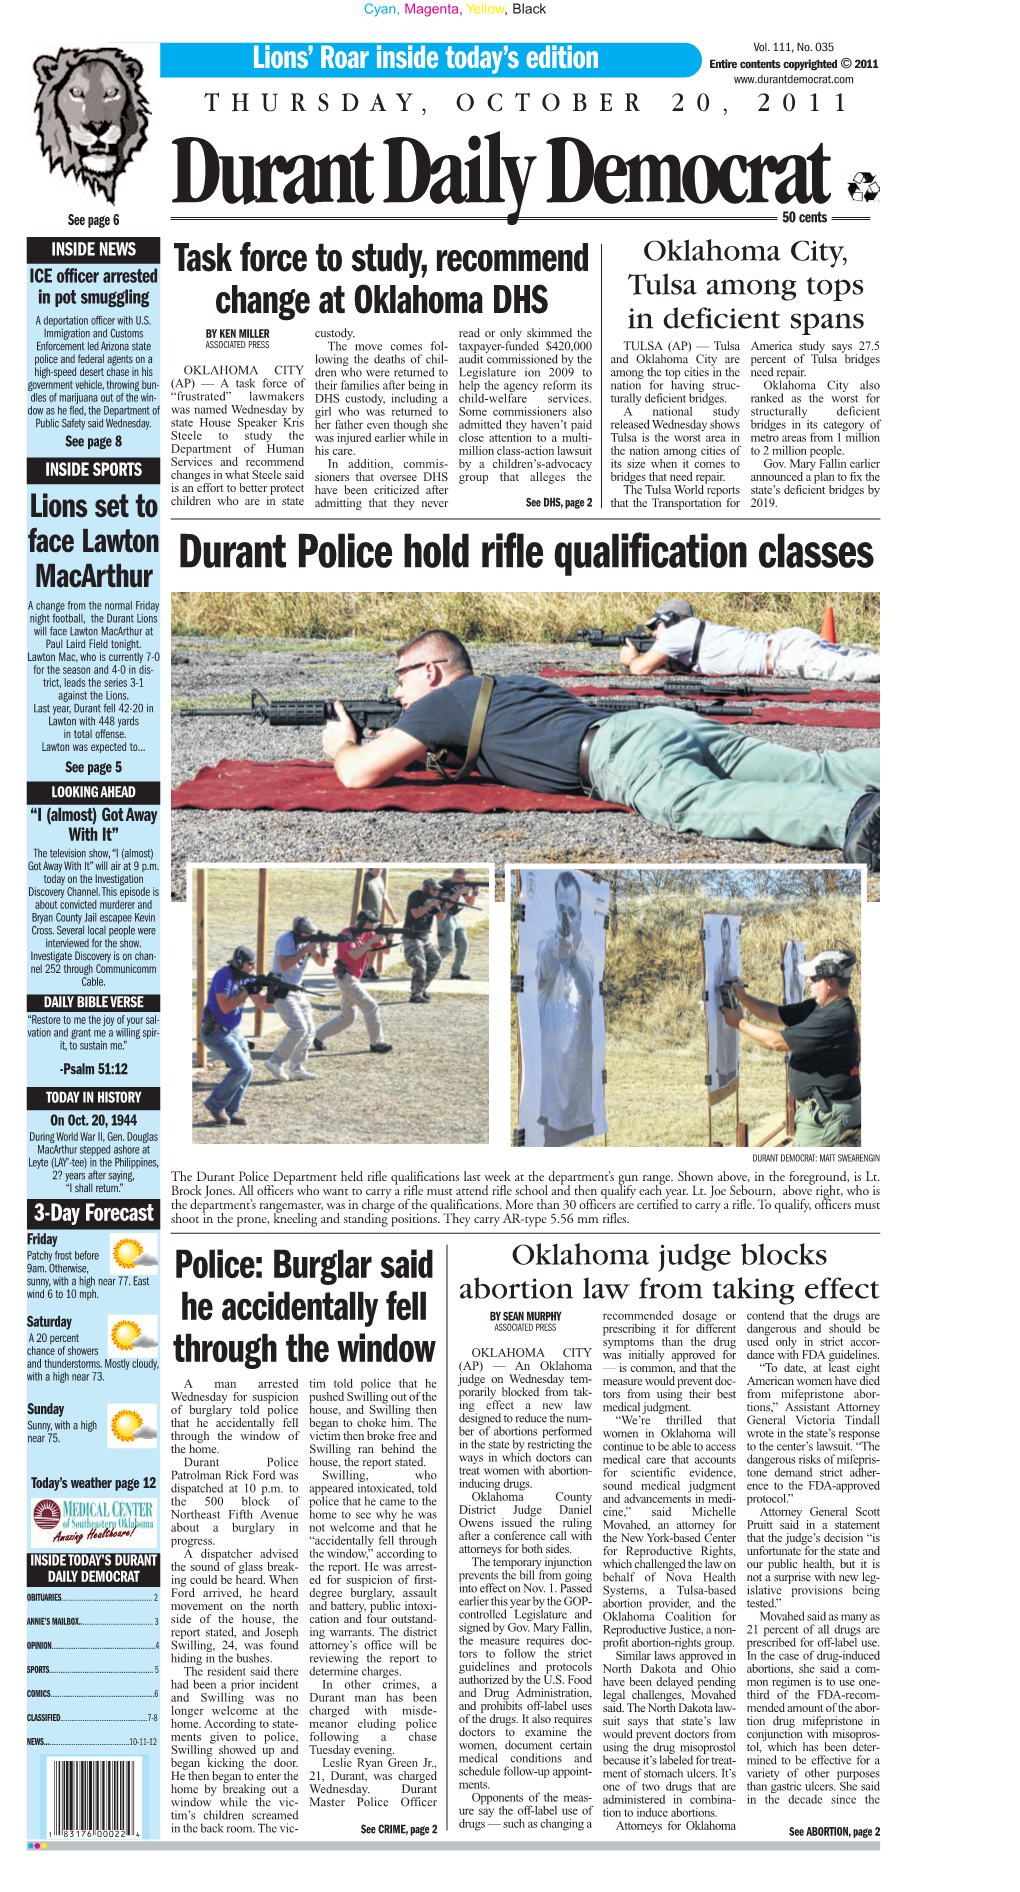 Durant Police Hold Rifle Qualification Classes